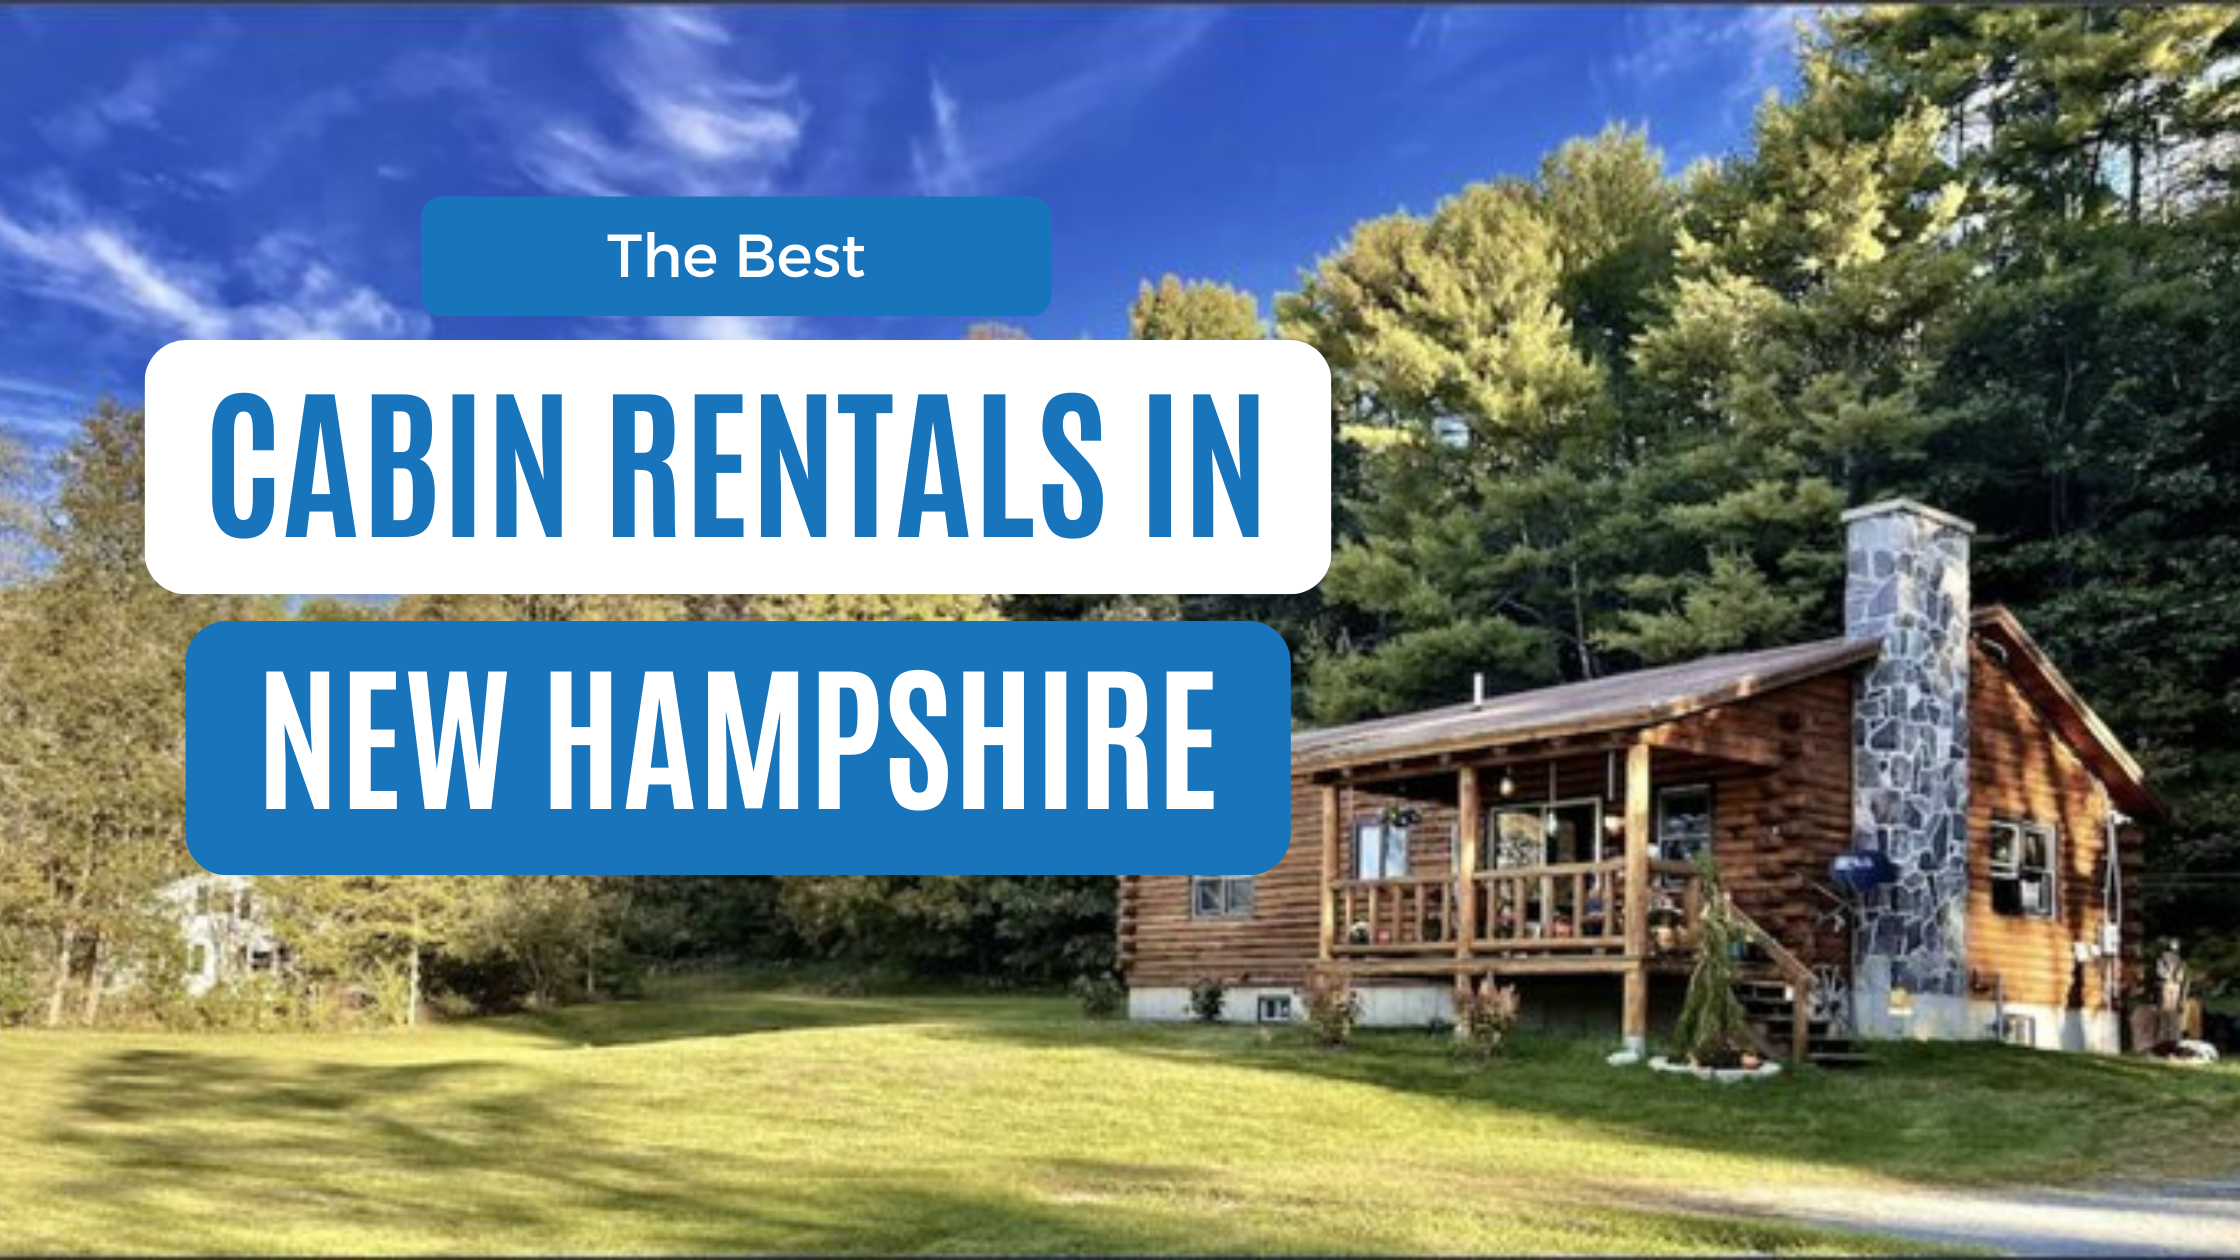 Soak In The Natural Beauty At These 16 Best Cabins In New Hampshire